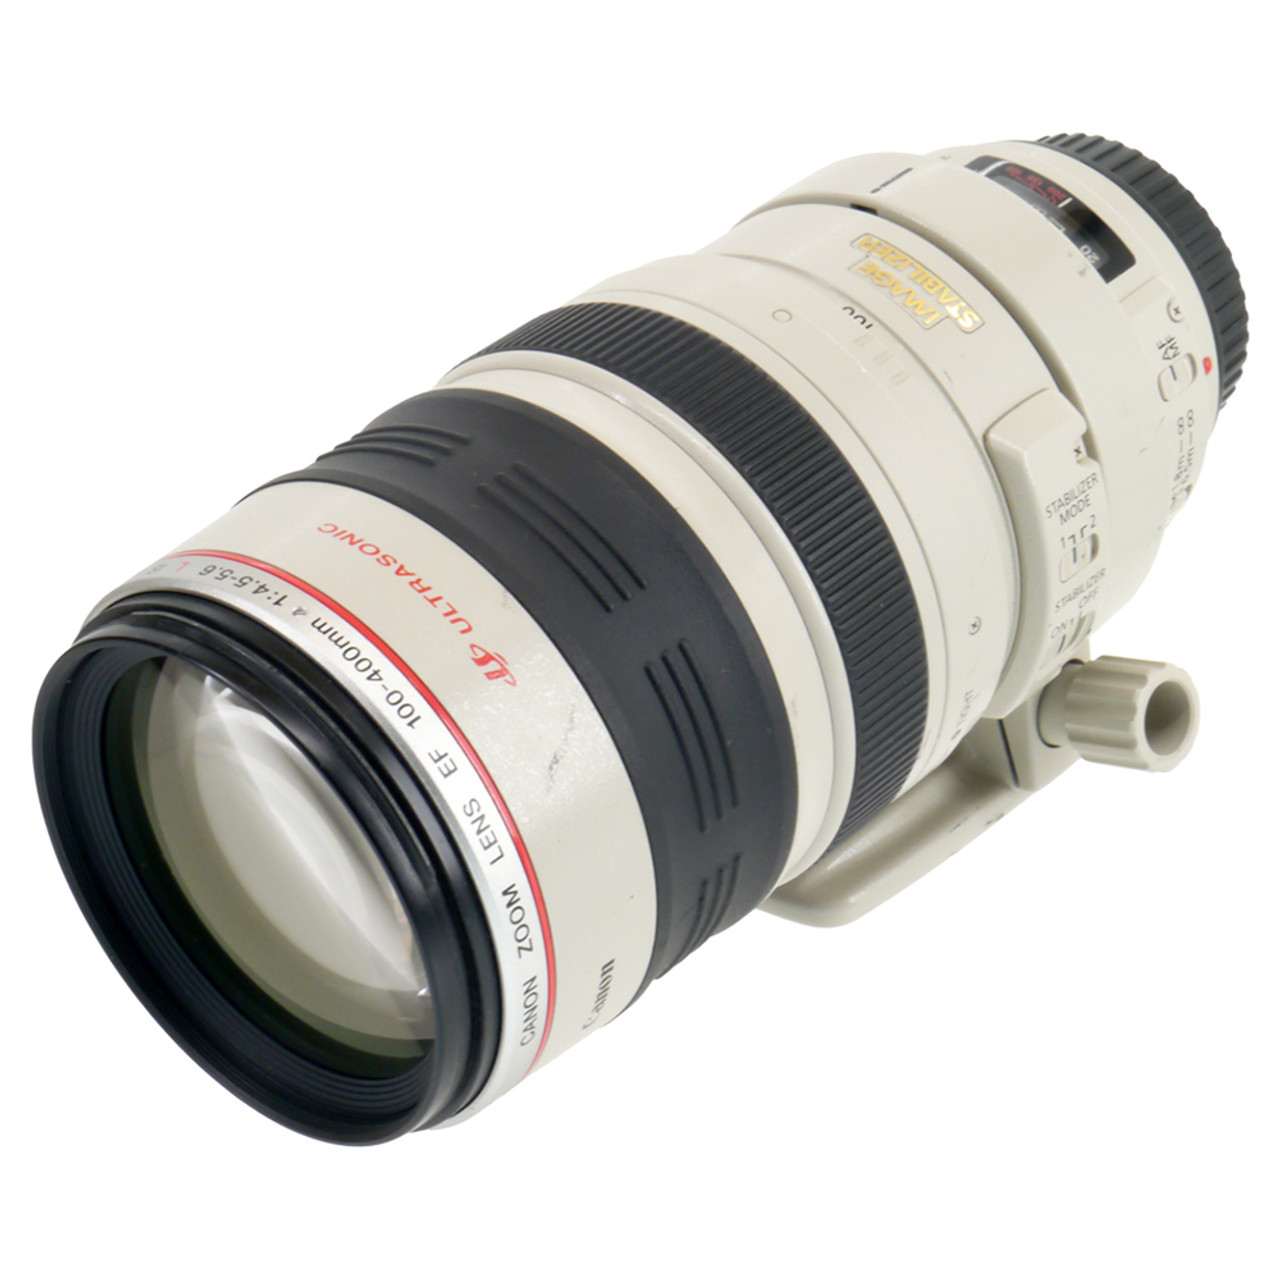 USED CANON EF 100-400MM F4.5-5.6 L IS (763926)